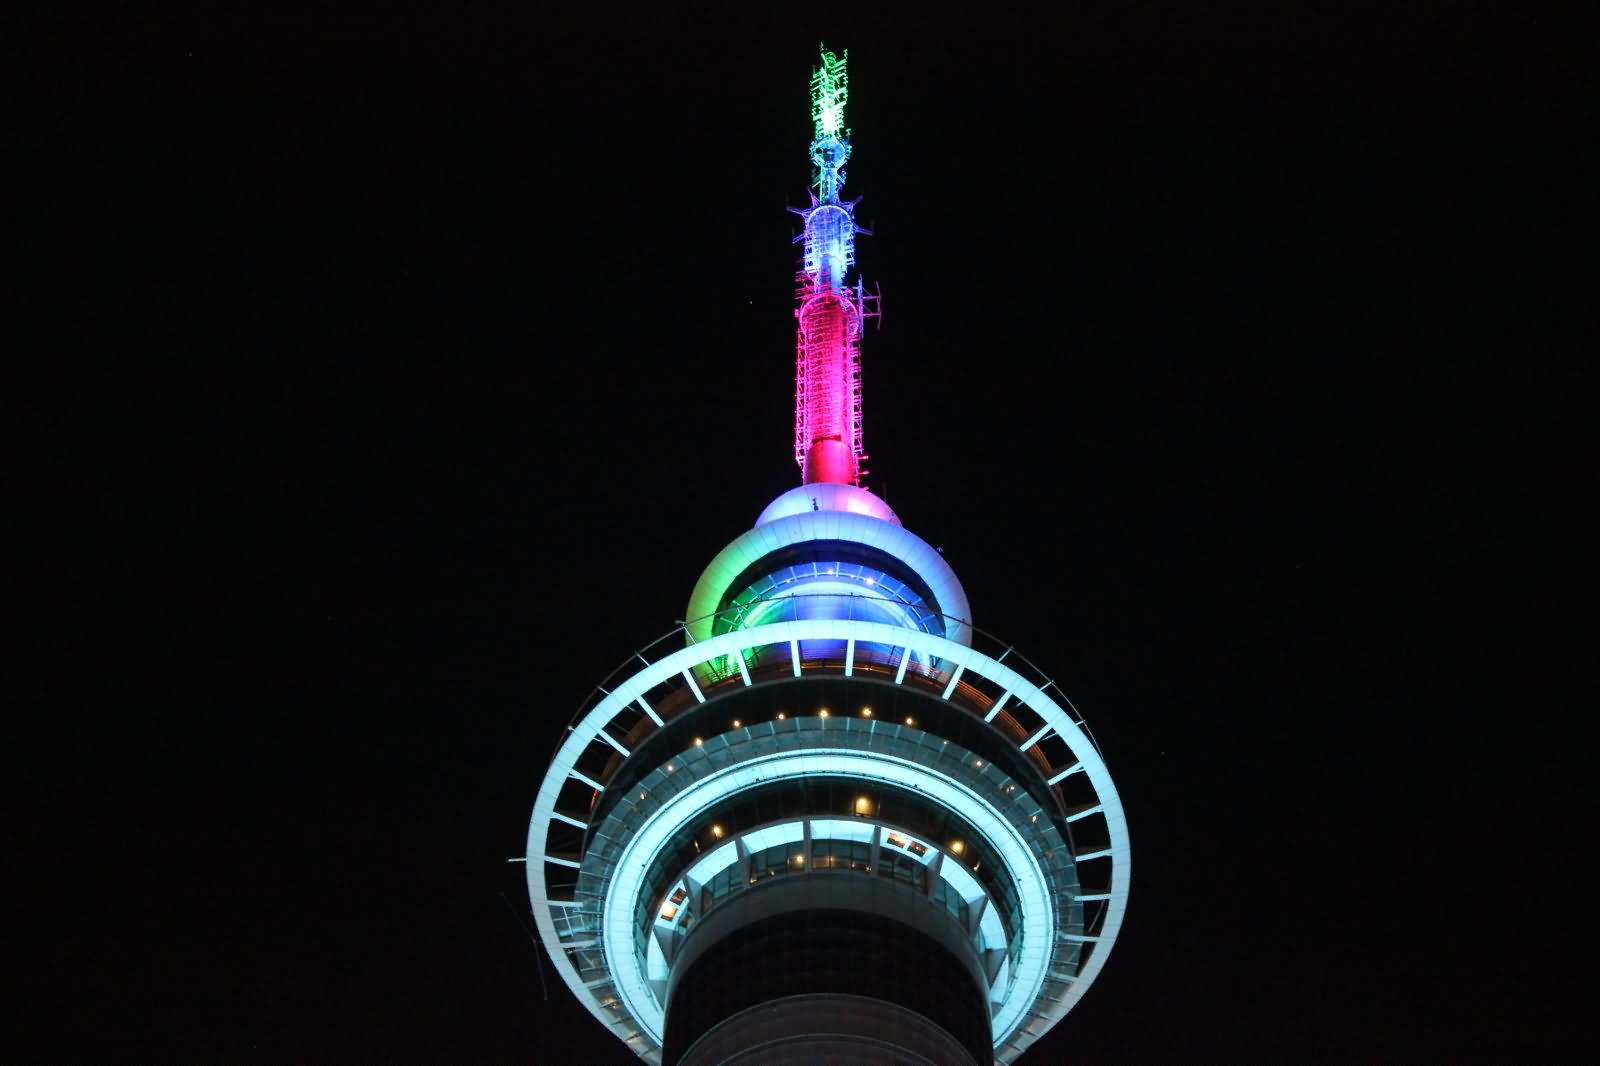 Night Lights At The Sky Tower.